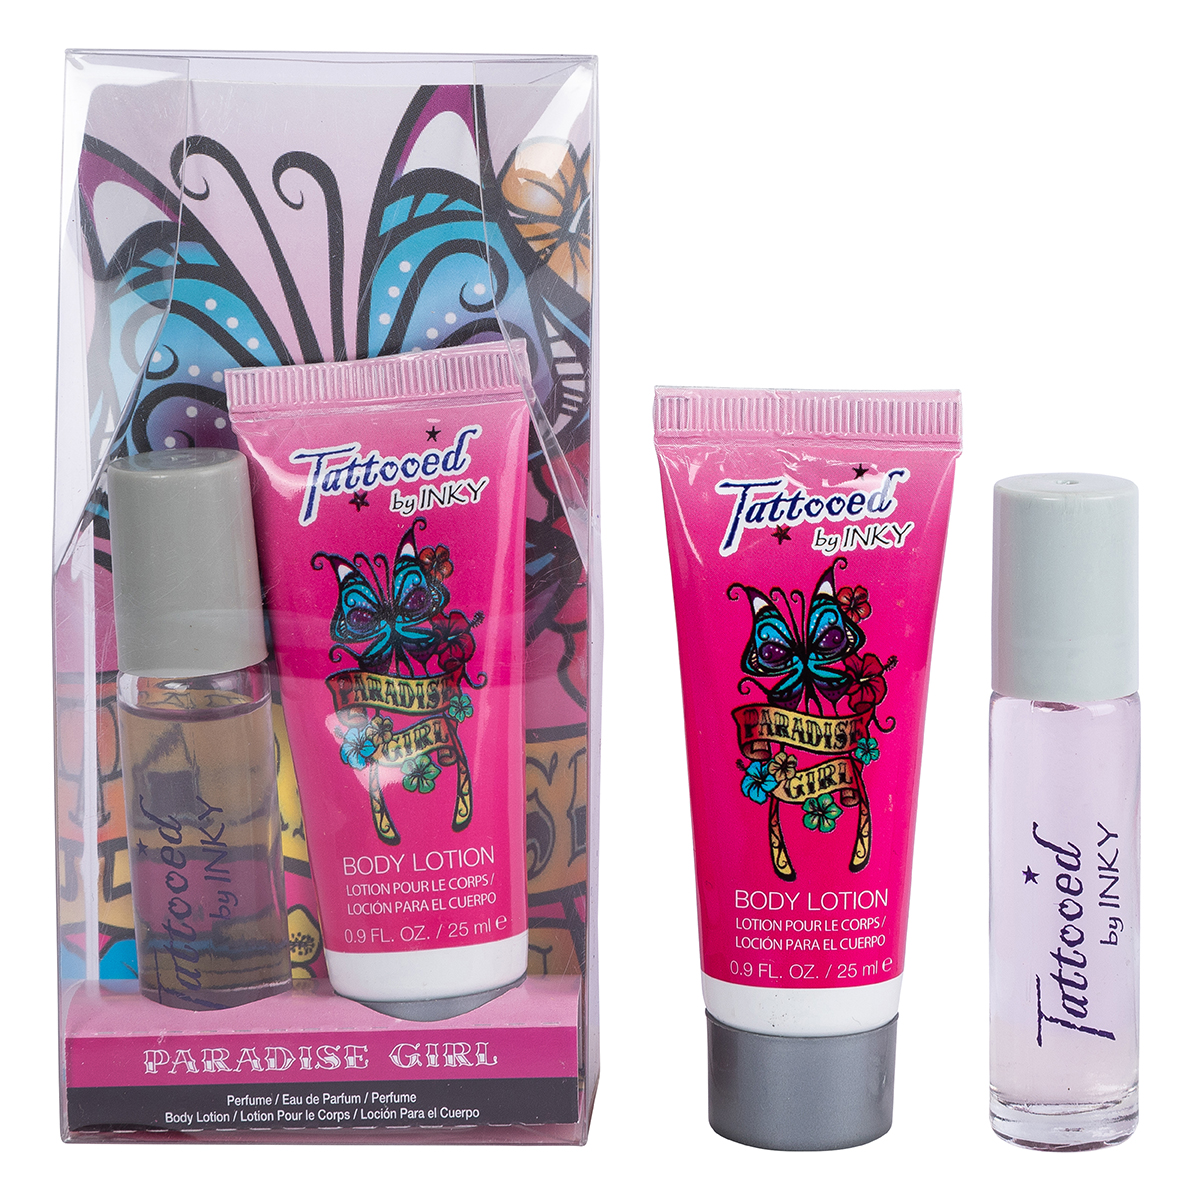 Free Tattooed by INKY  Paradise Girl  Perfume  Body Lotion Gift Set   Fragrances  Listiacom Auctions for Free Stuff